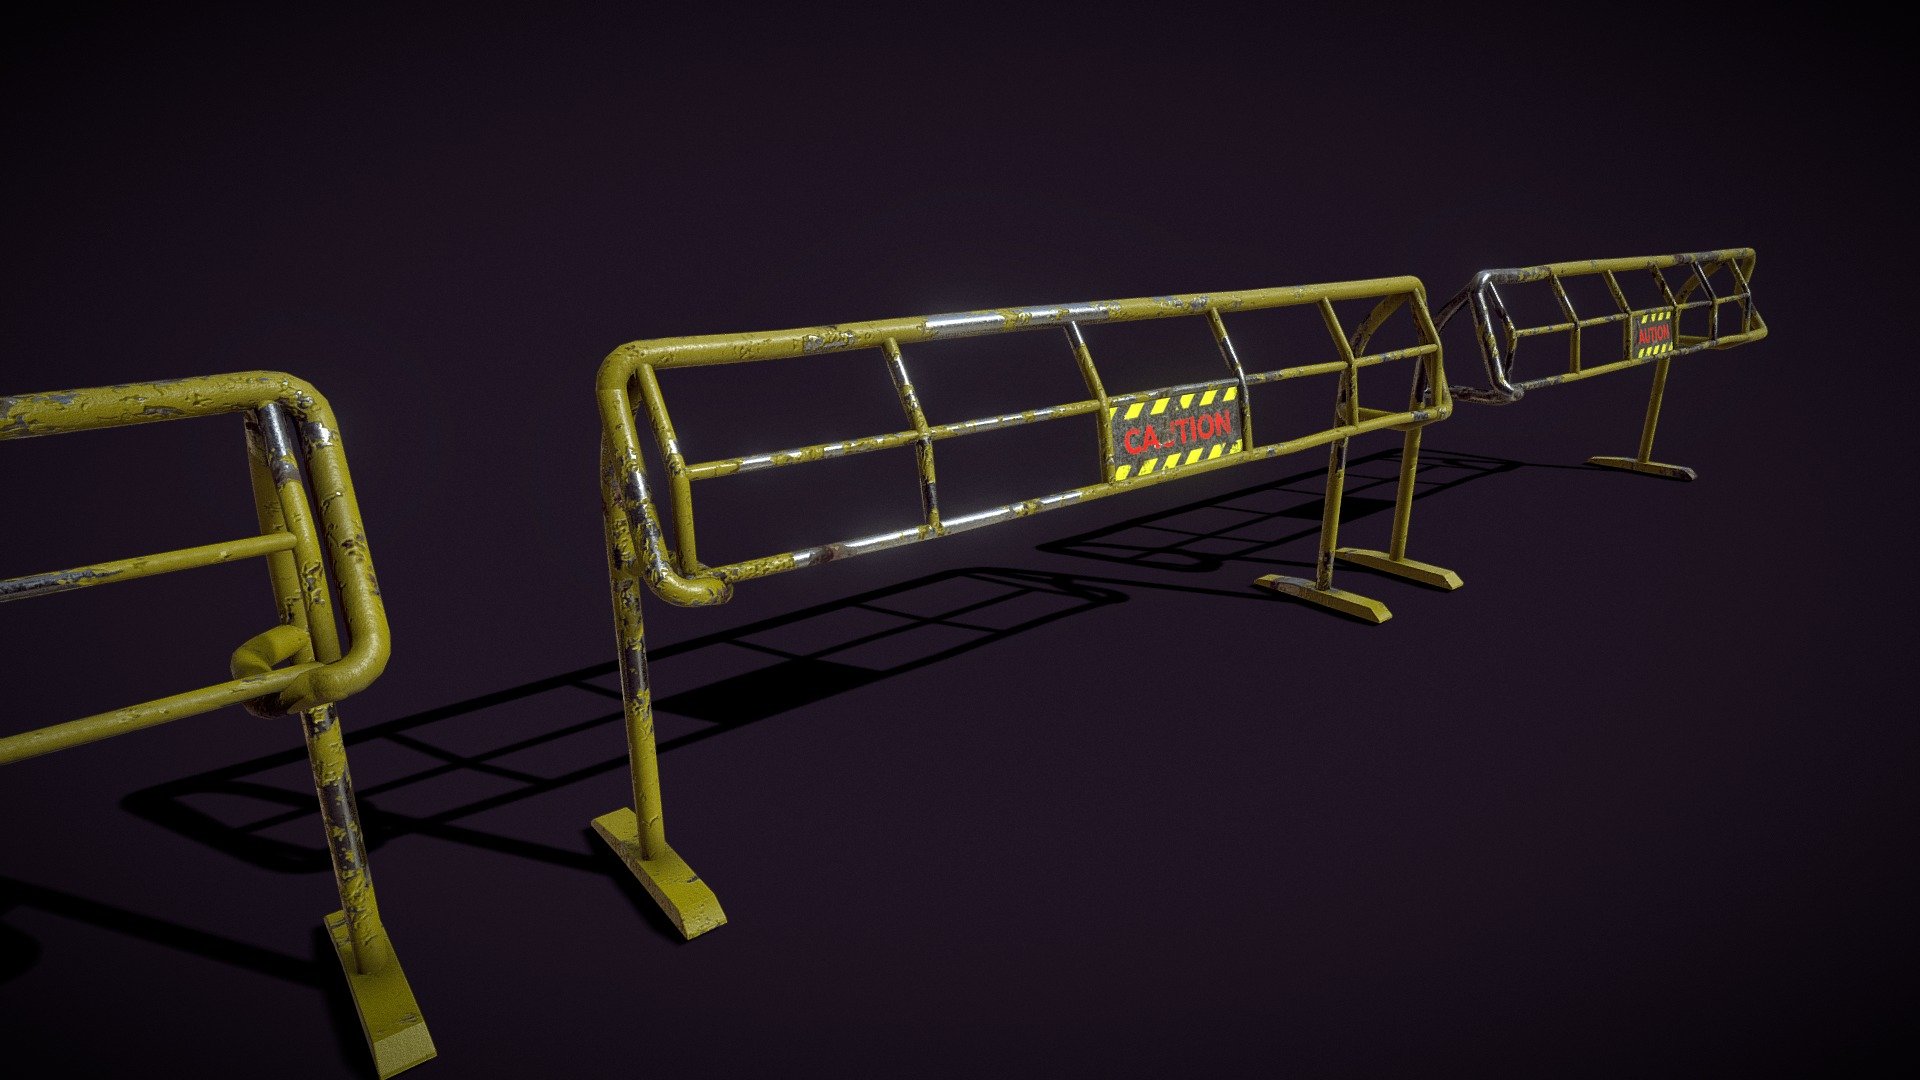 Set of 3 industrial damaged yellow barriers game-ready assets that can fit your cyberpunk, scifi, post-apo or urban environment.
Seamless texturing : crackled paint is fully wrapped on the metal bars, assets can work from any angle, no glitchs.
Decal &ldquo;Caution